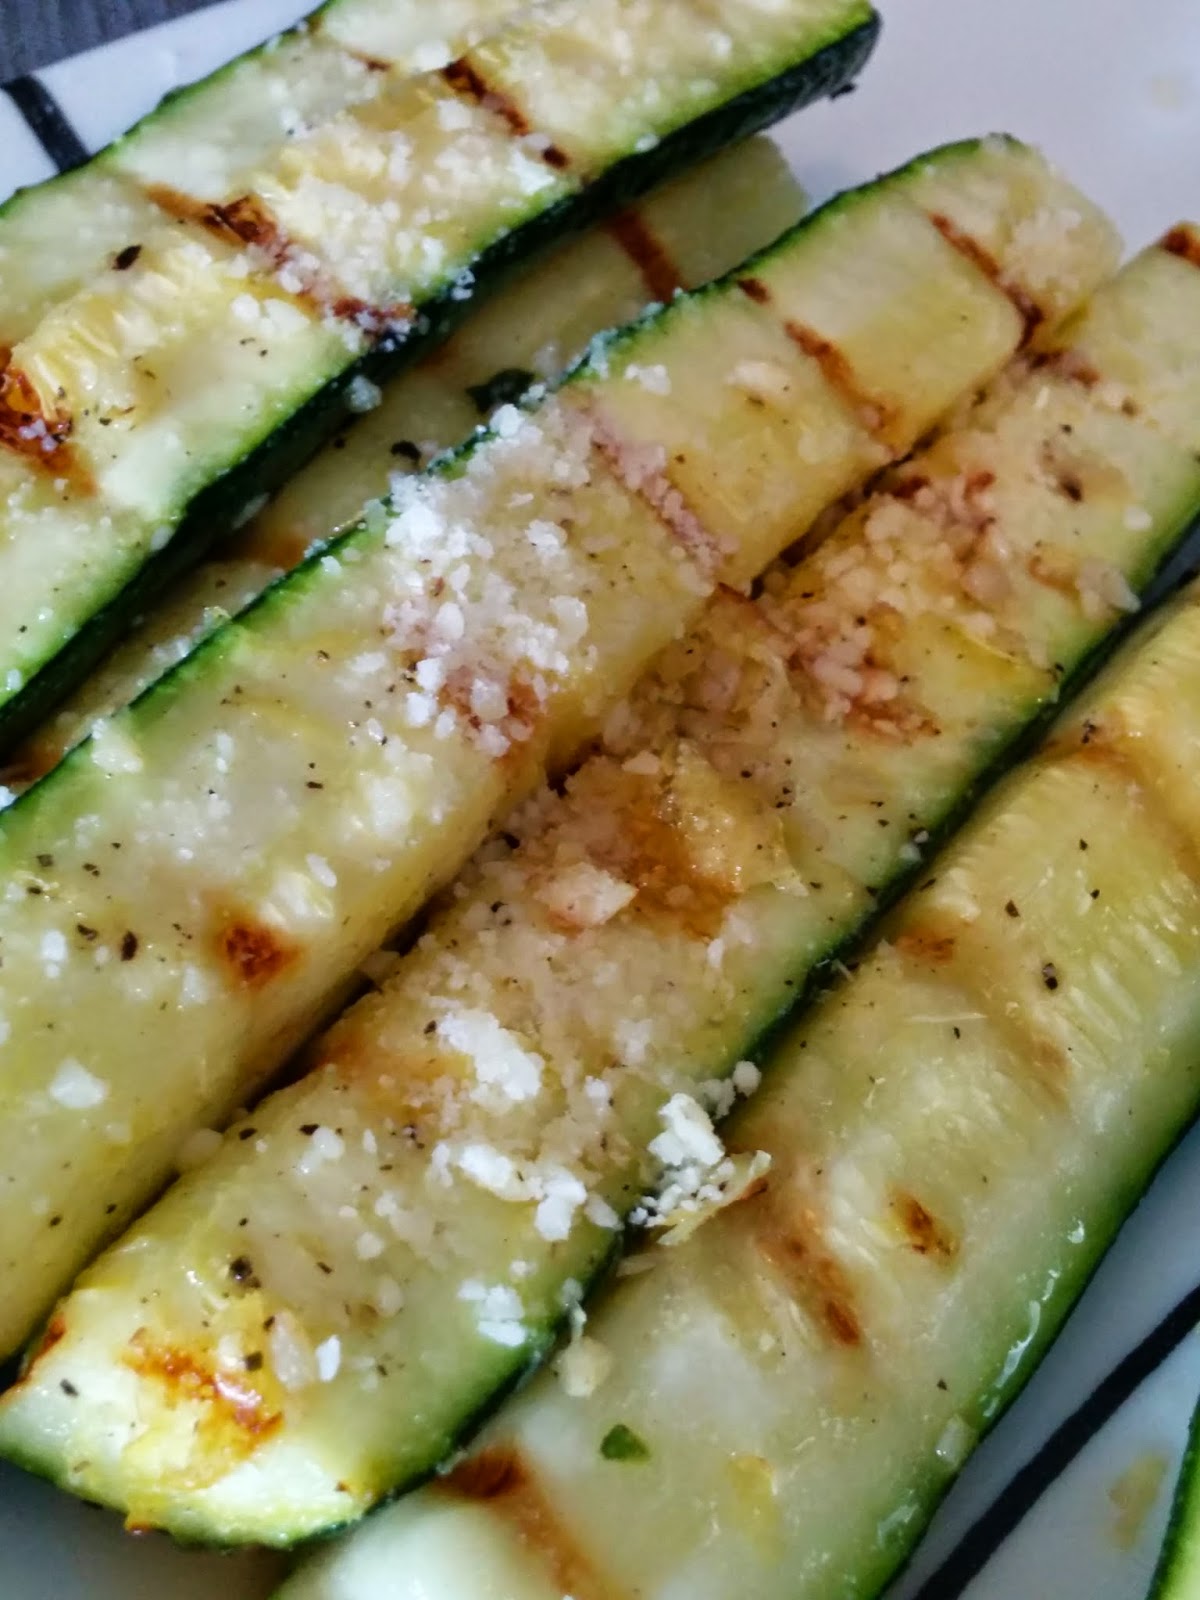 The On-Call Cook: Grilled Zucchini with Parmesan